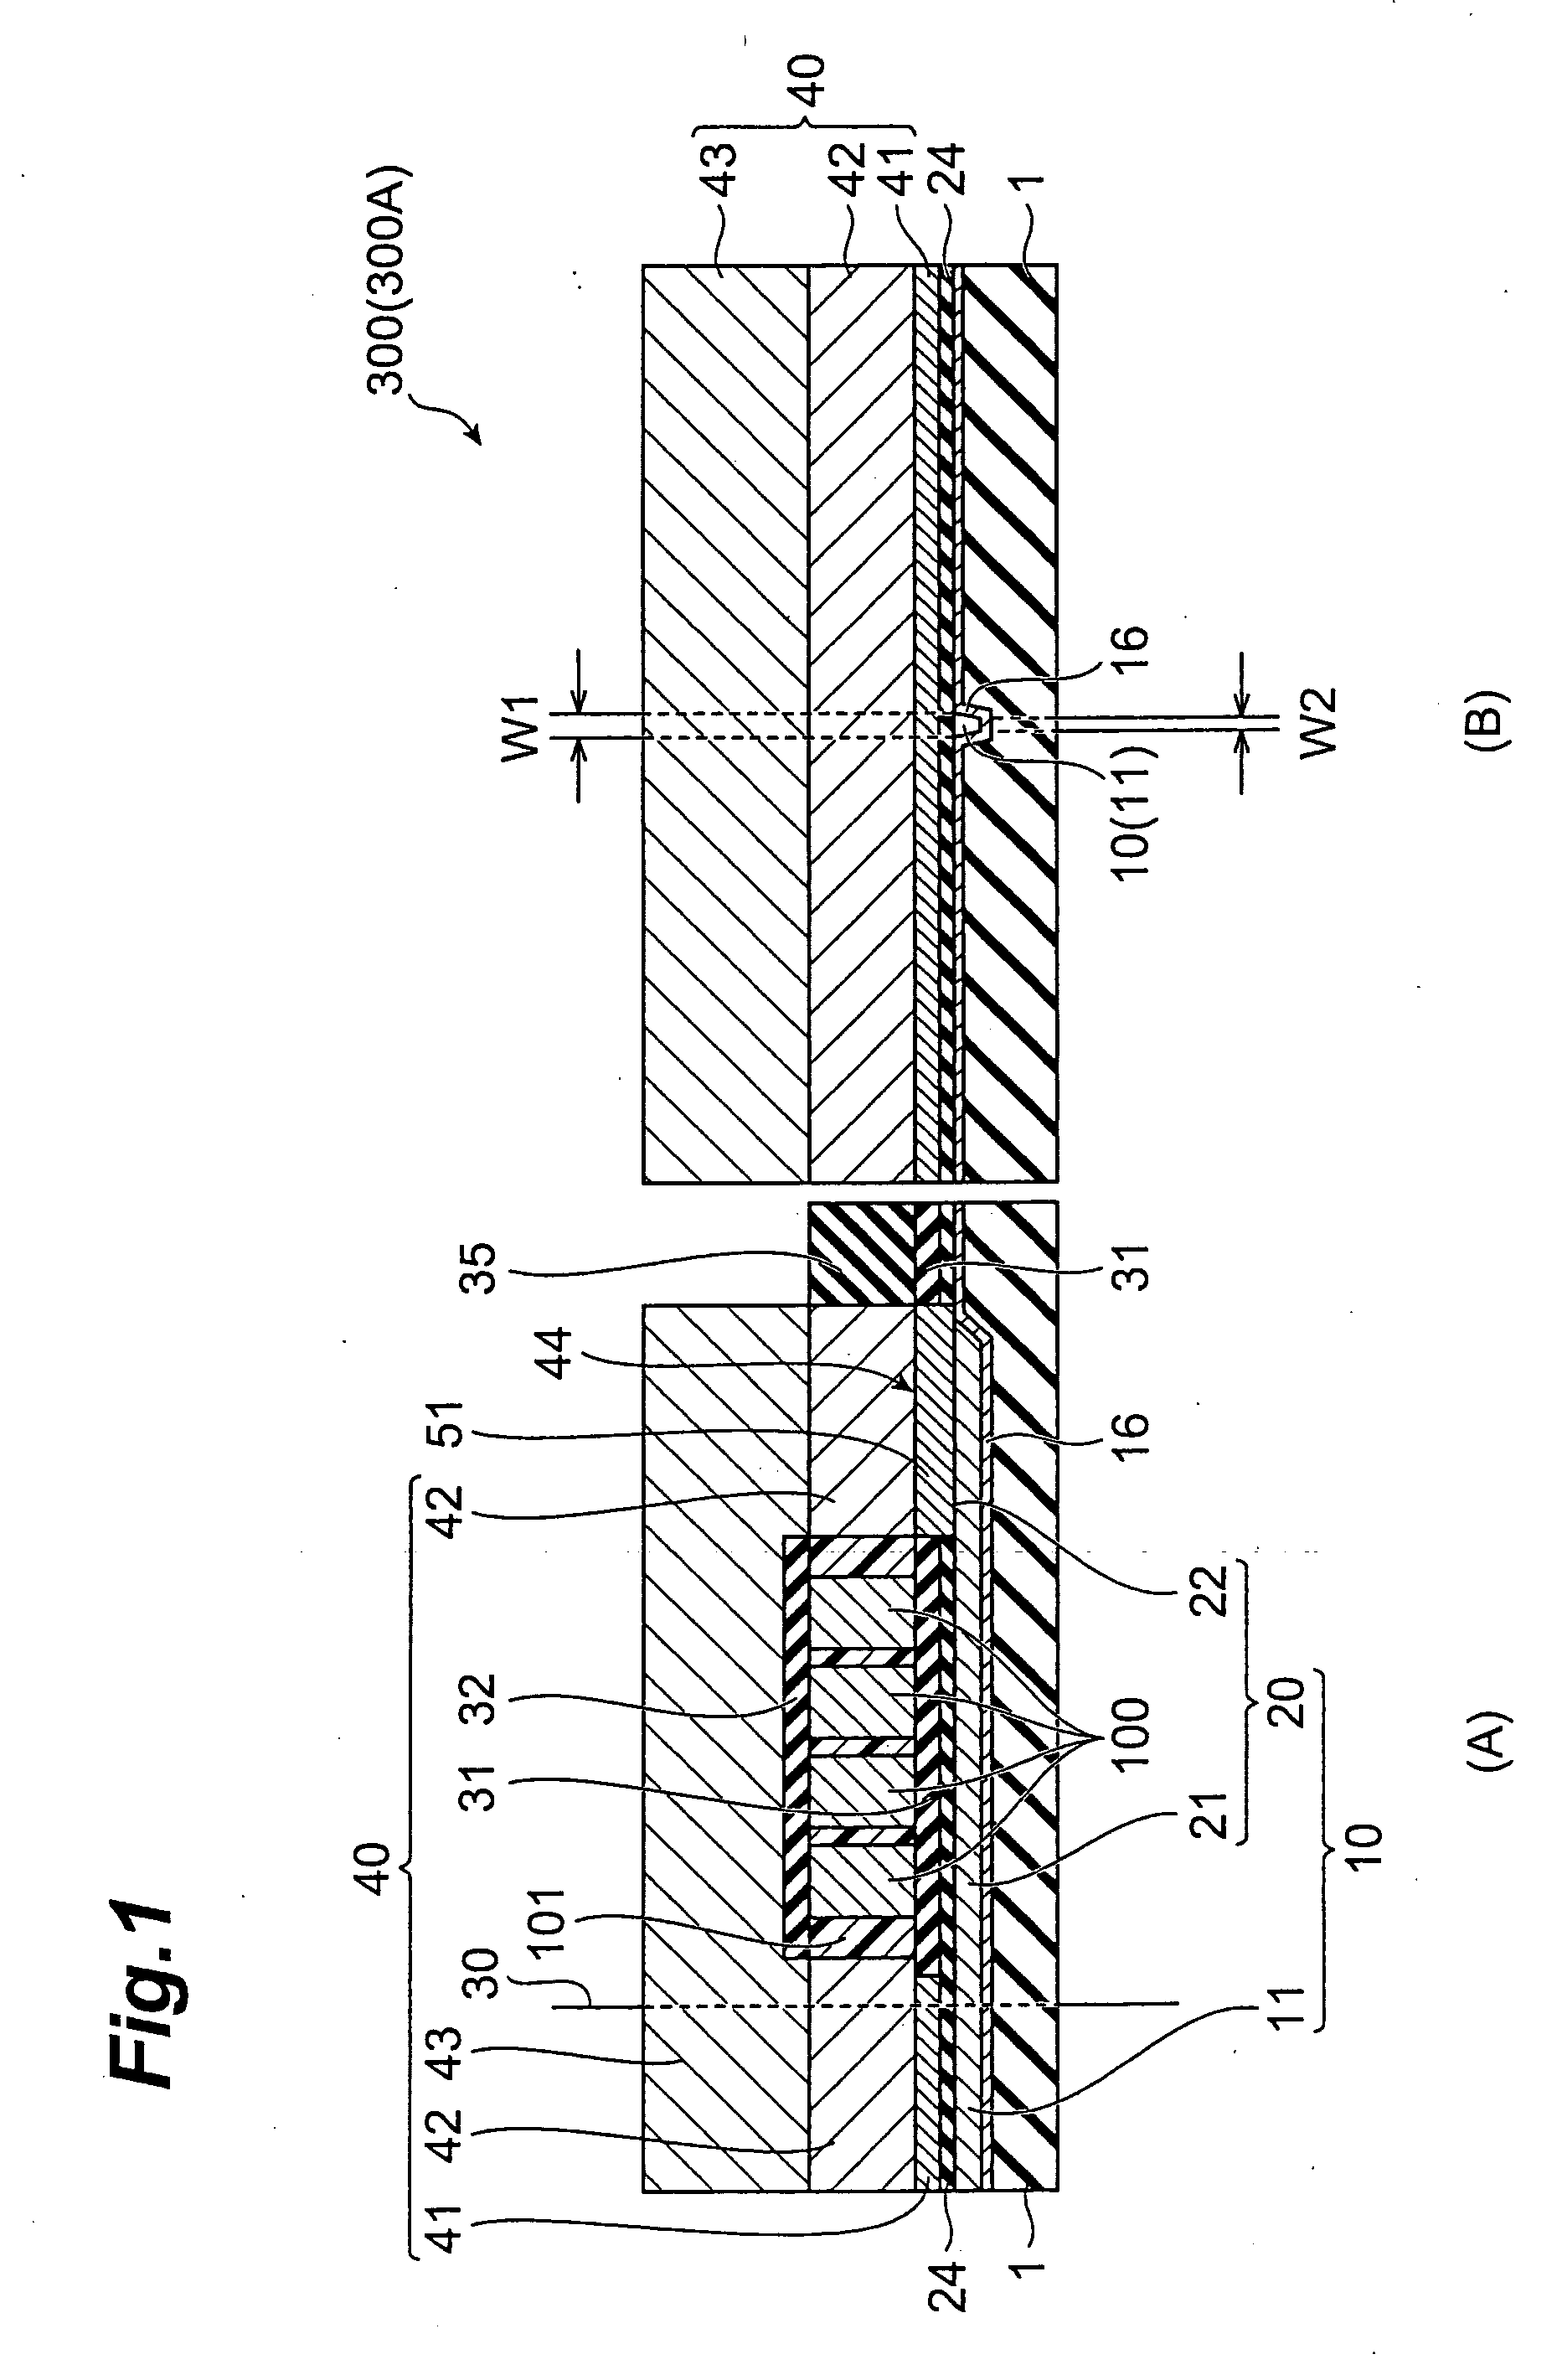 Thin-film magnetic head structure, method of manufacturing the same, and thin-film magnetic head